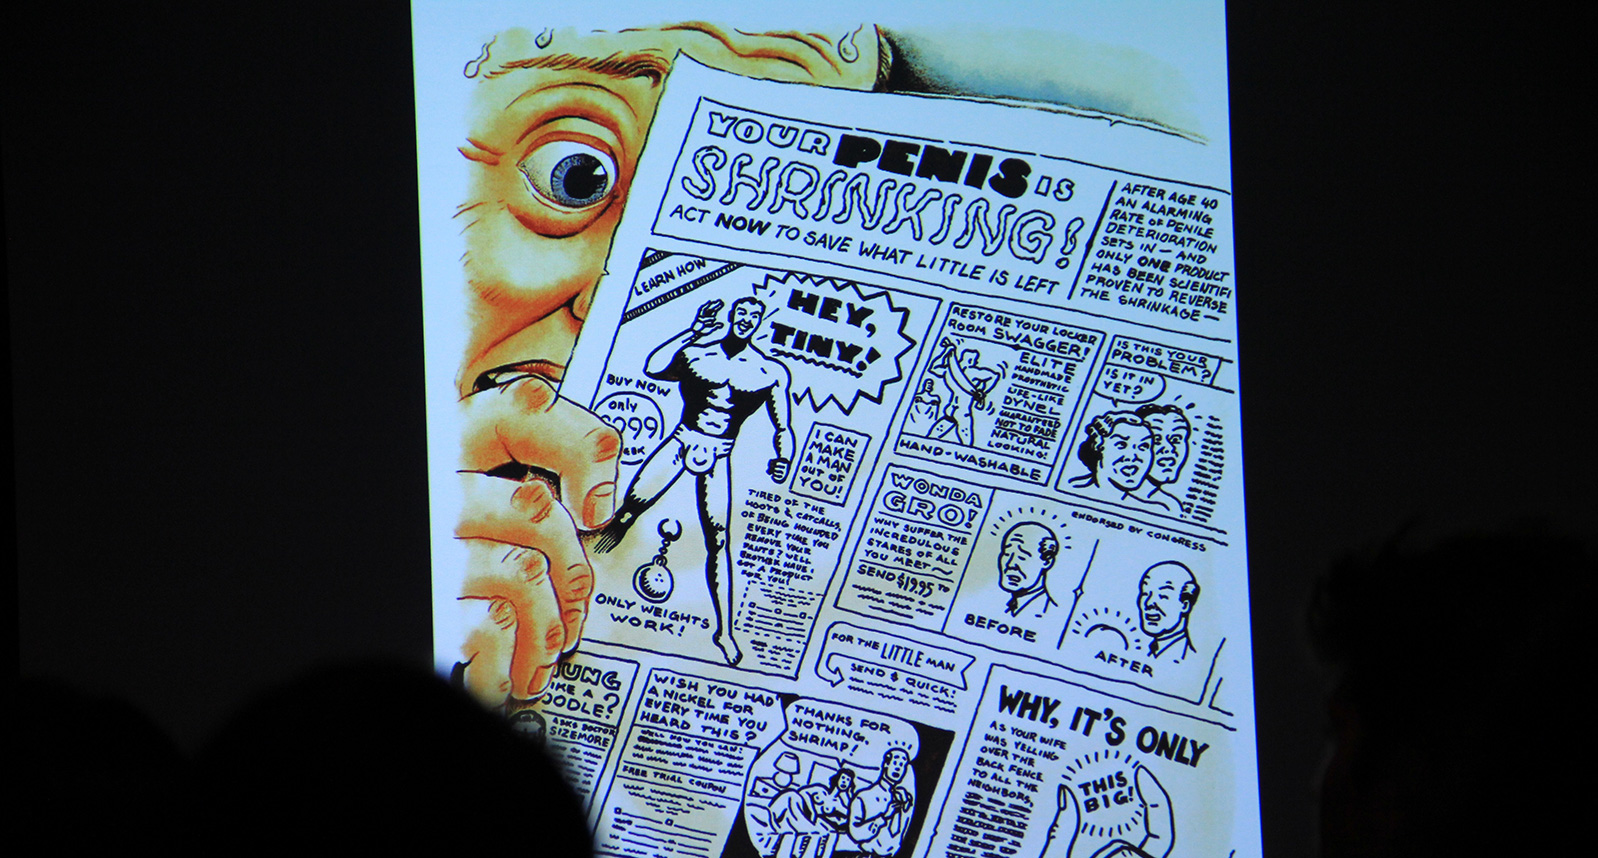 a comic book page with superhero illustrations and storylines is projected onto a wall